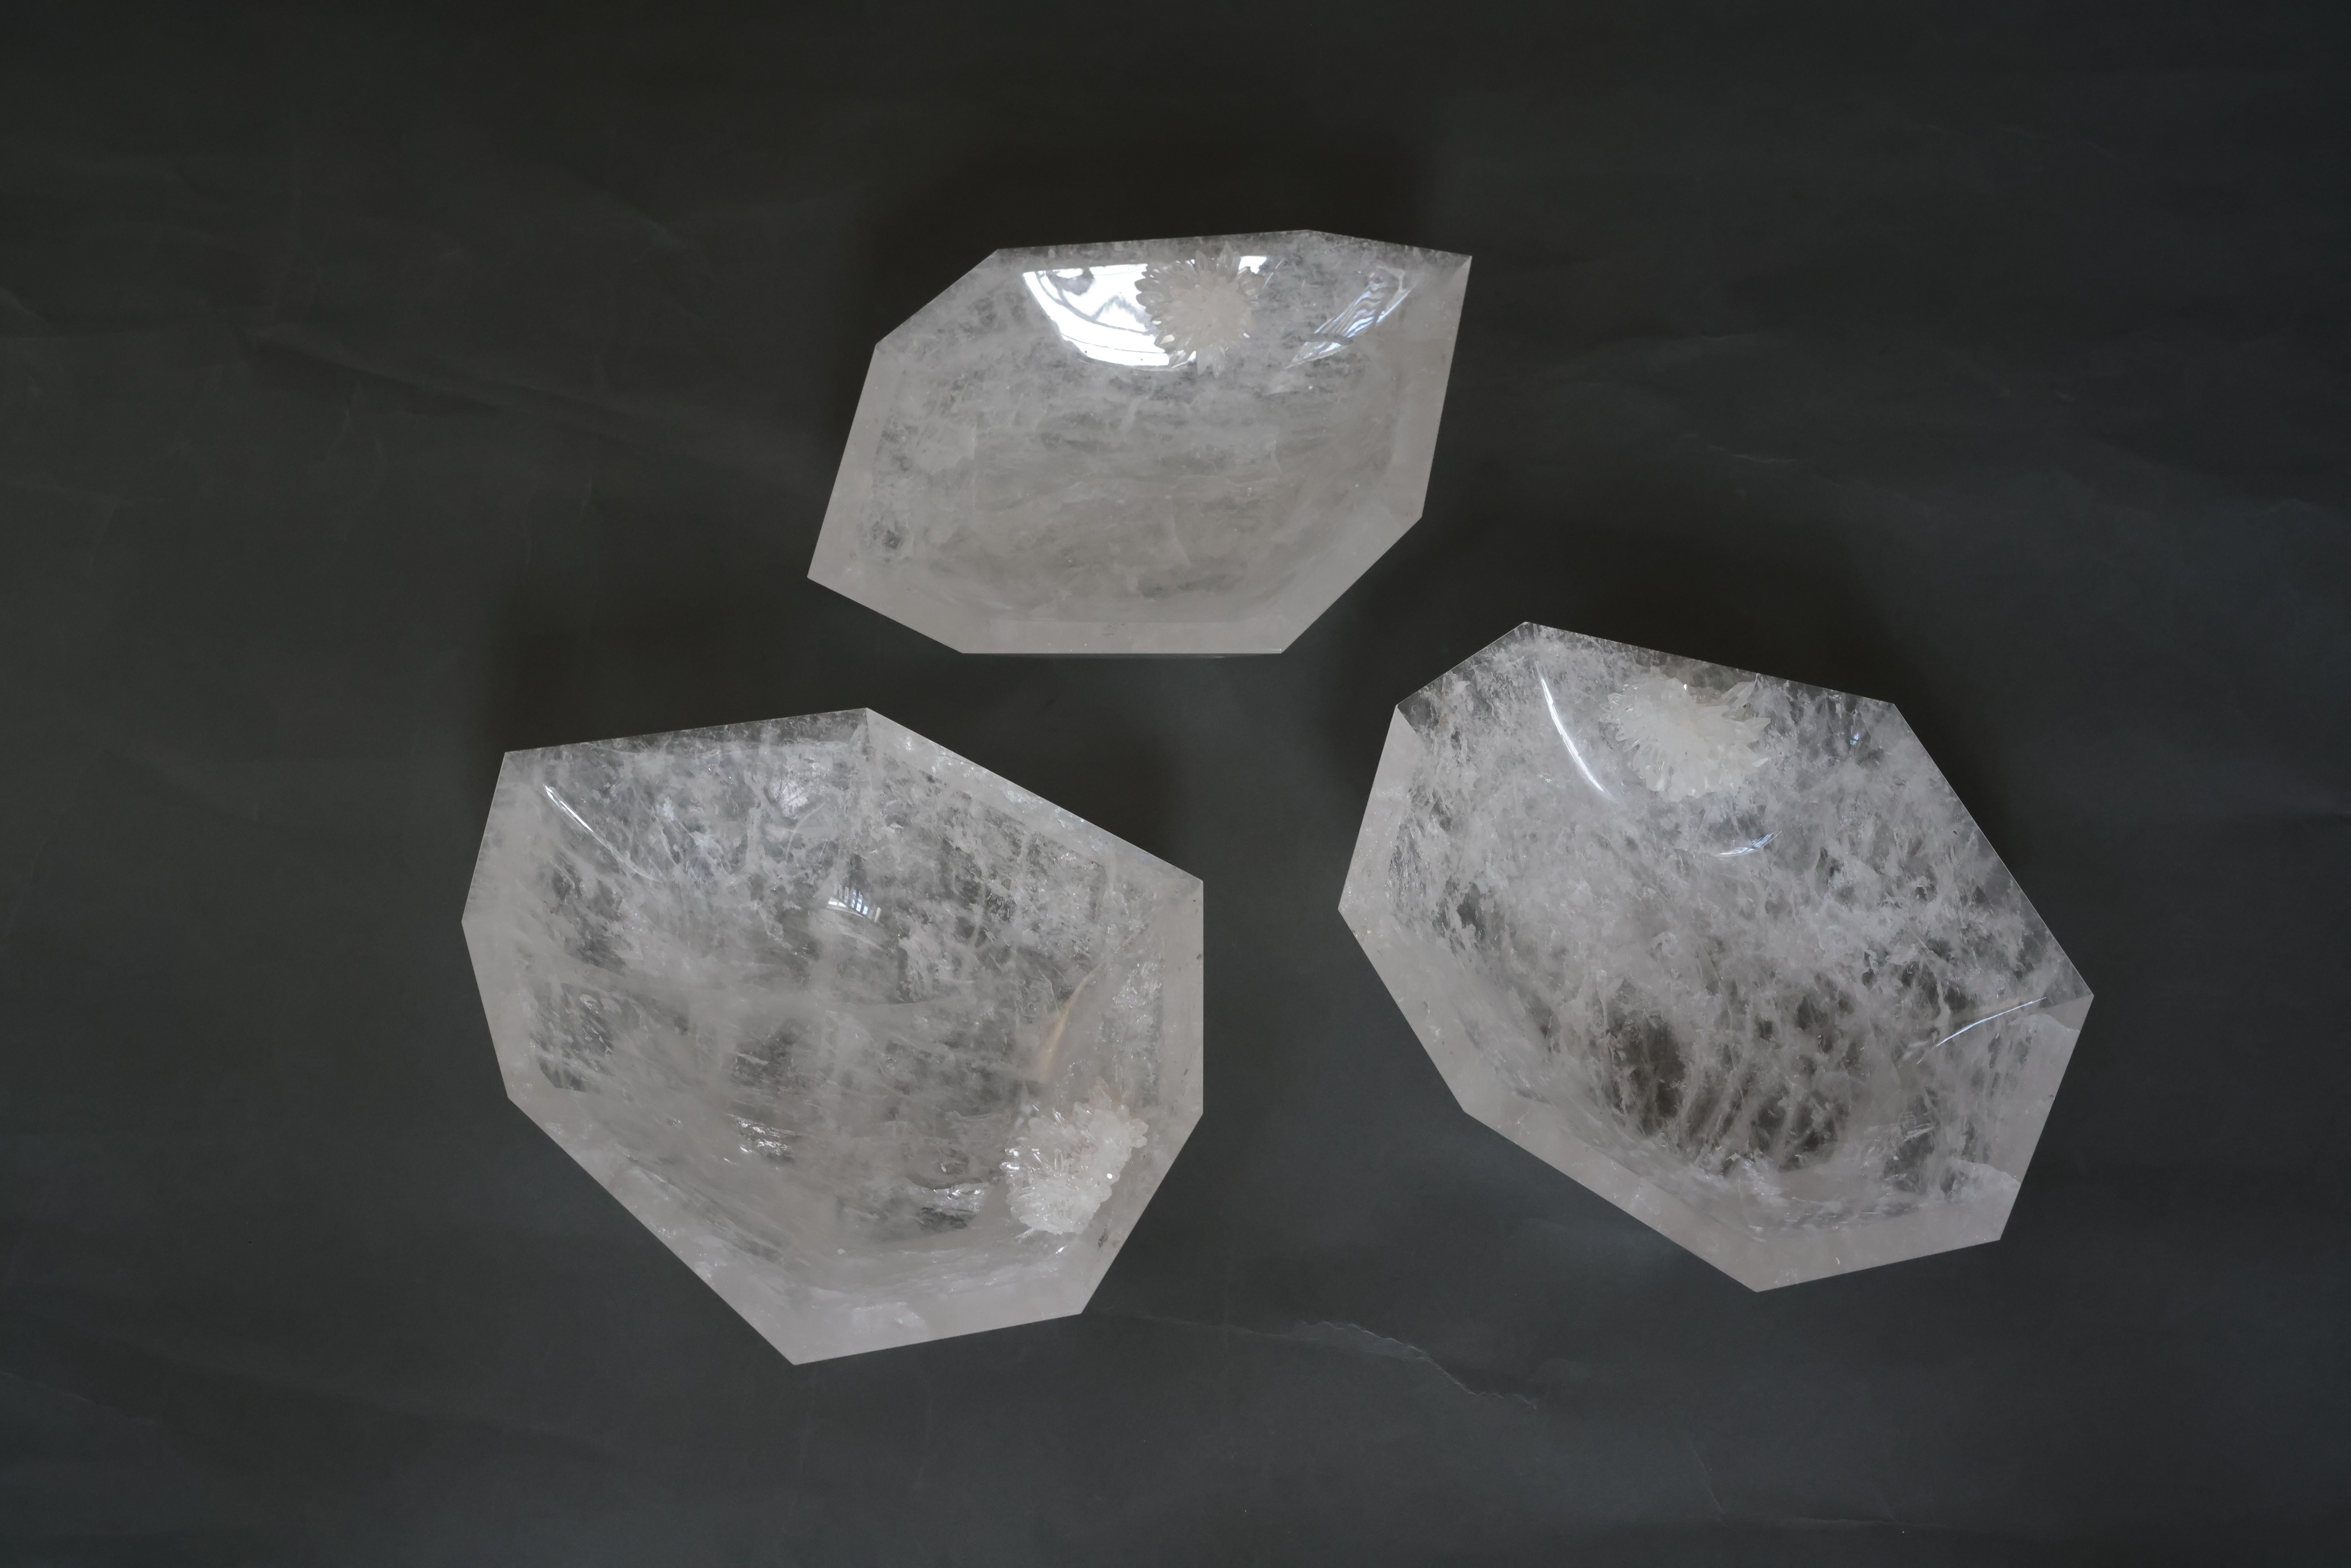 Group of three geometric form rock crystal centerpieces
With clusters decorations. Carved from billions years old natural Quartz crystal. Created by Phoenix gallery
Measures: 13”x 9.5”x 3.25. 
12.25”x9.75”x3.25”
12.5” x 9.5” x 3.25”.
 